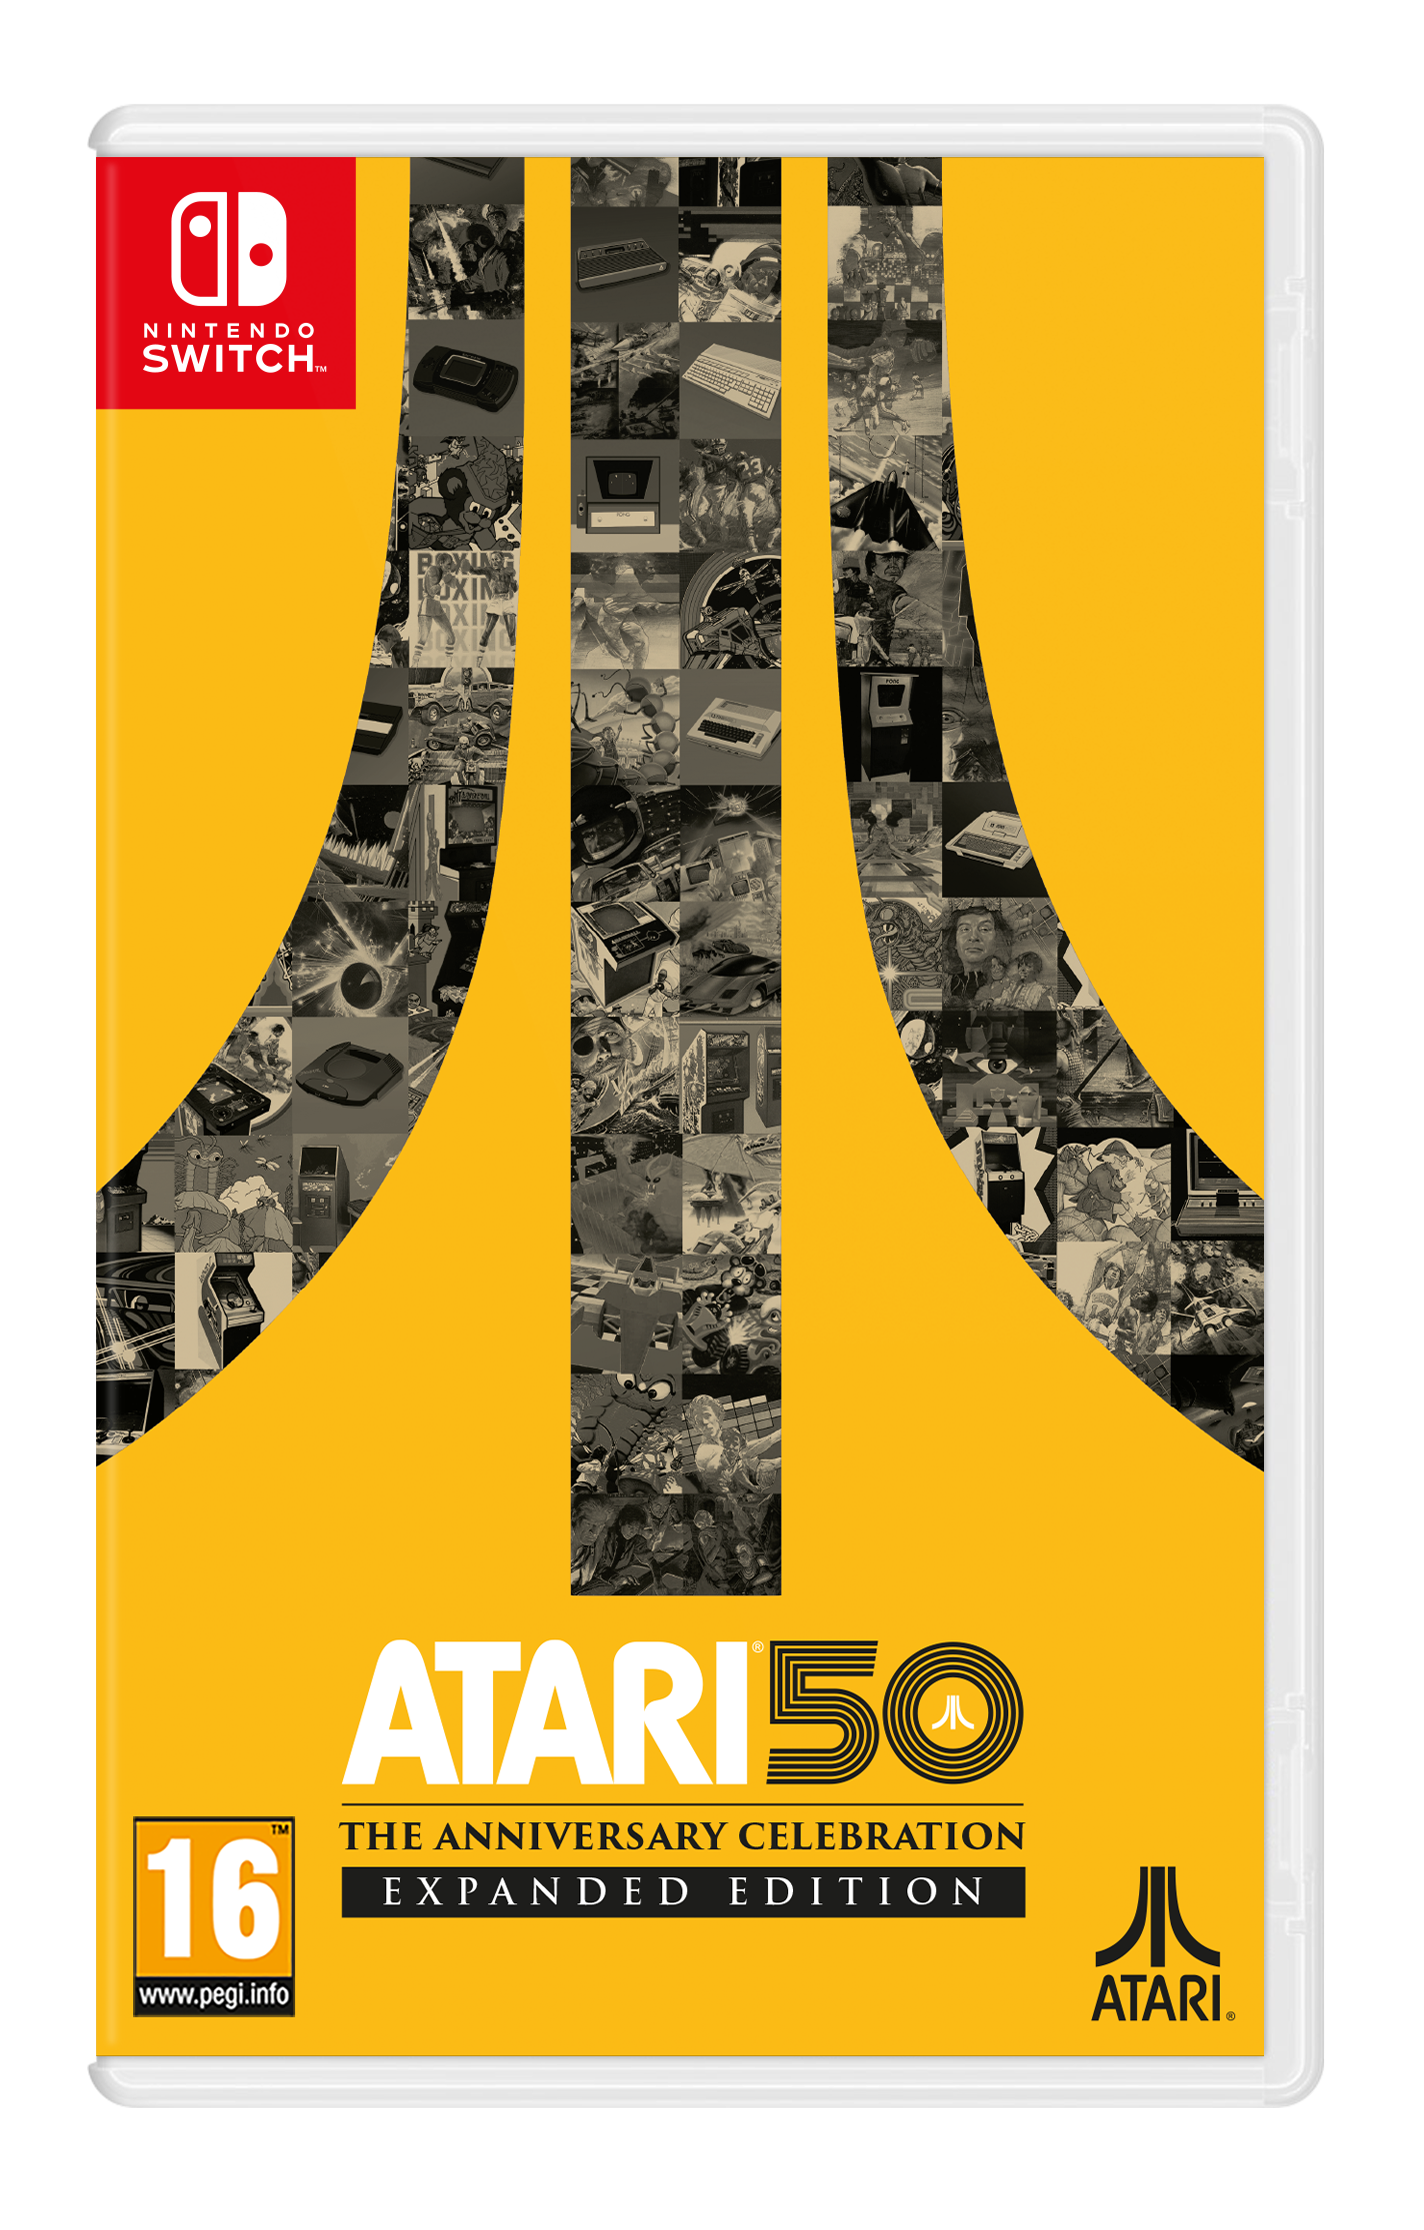 Atari 50: The Anniversary Celebration Expended Steelbook Edition SWITCH